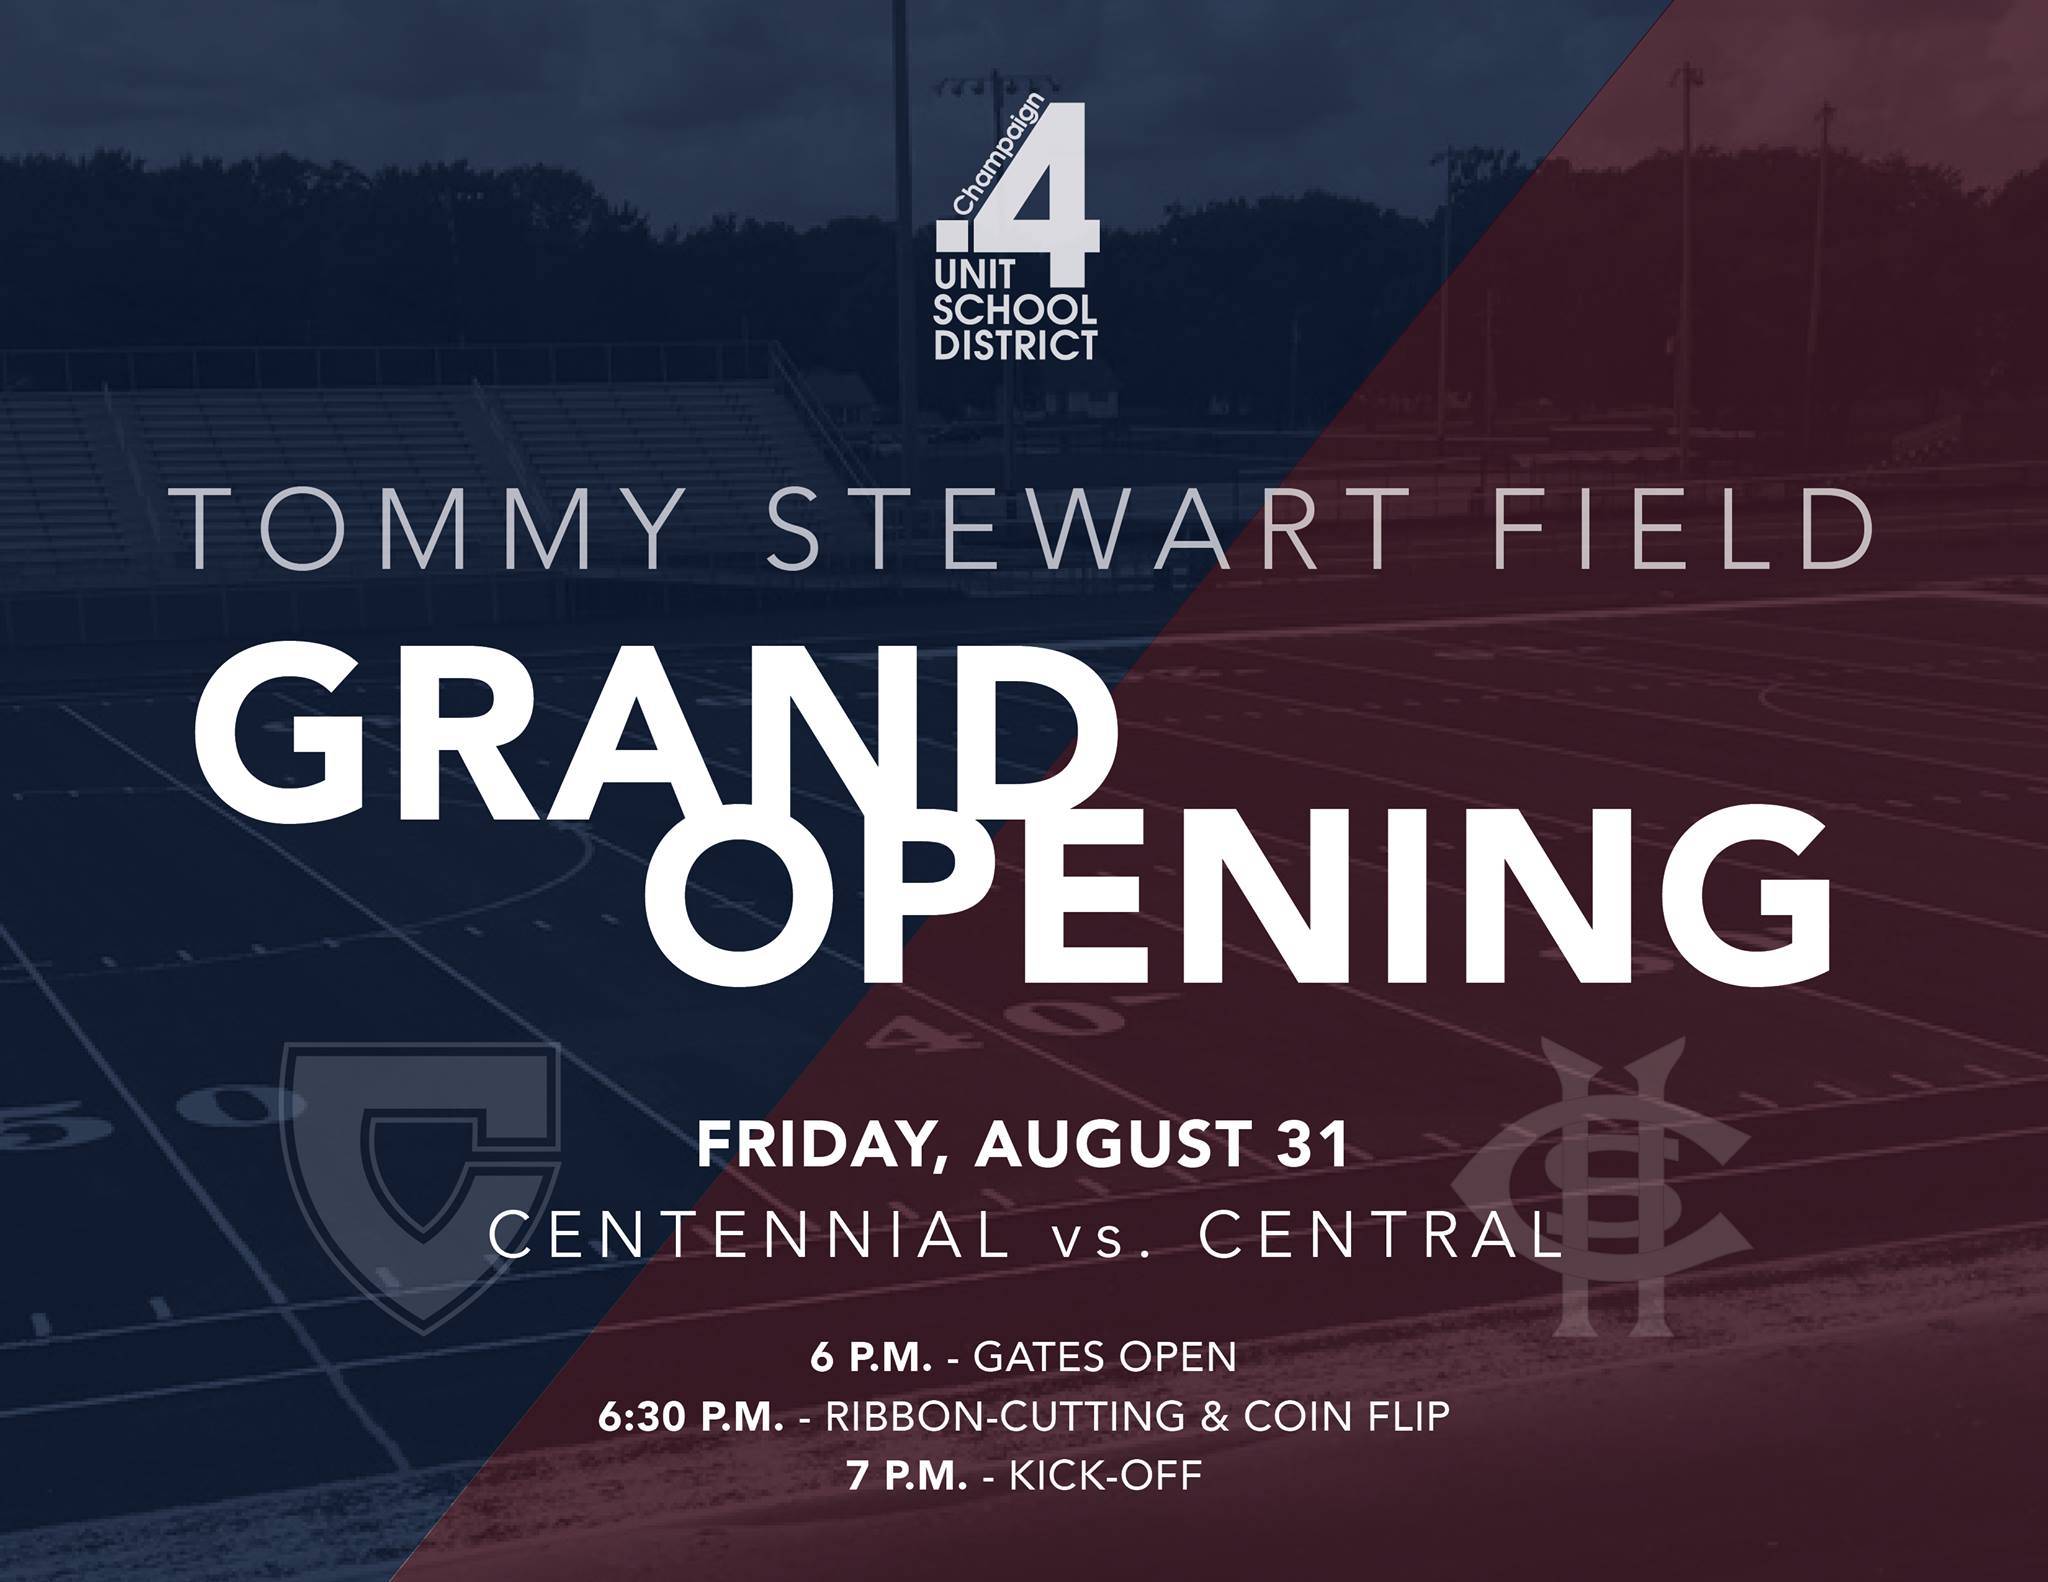 Centennial High School is ready to unveil the new Tommy Stewart Field